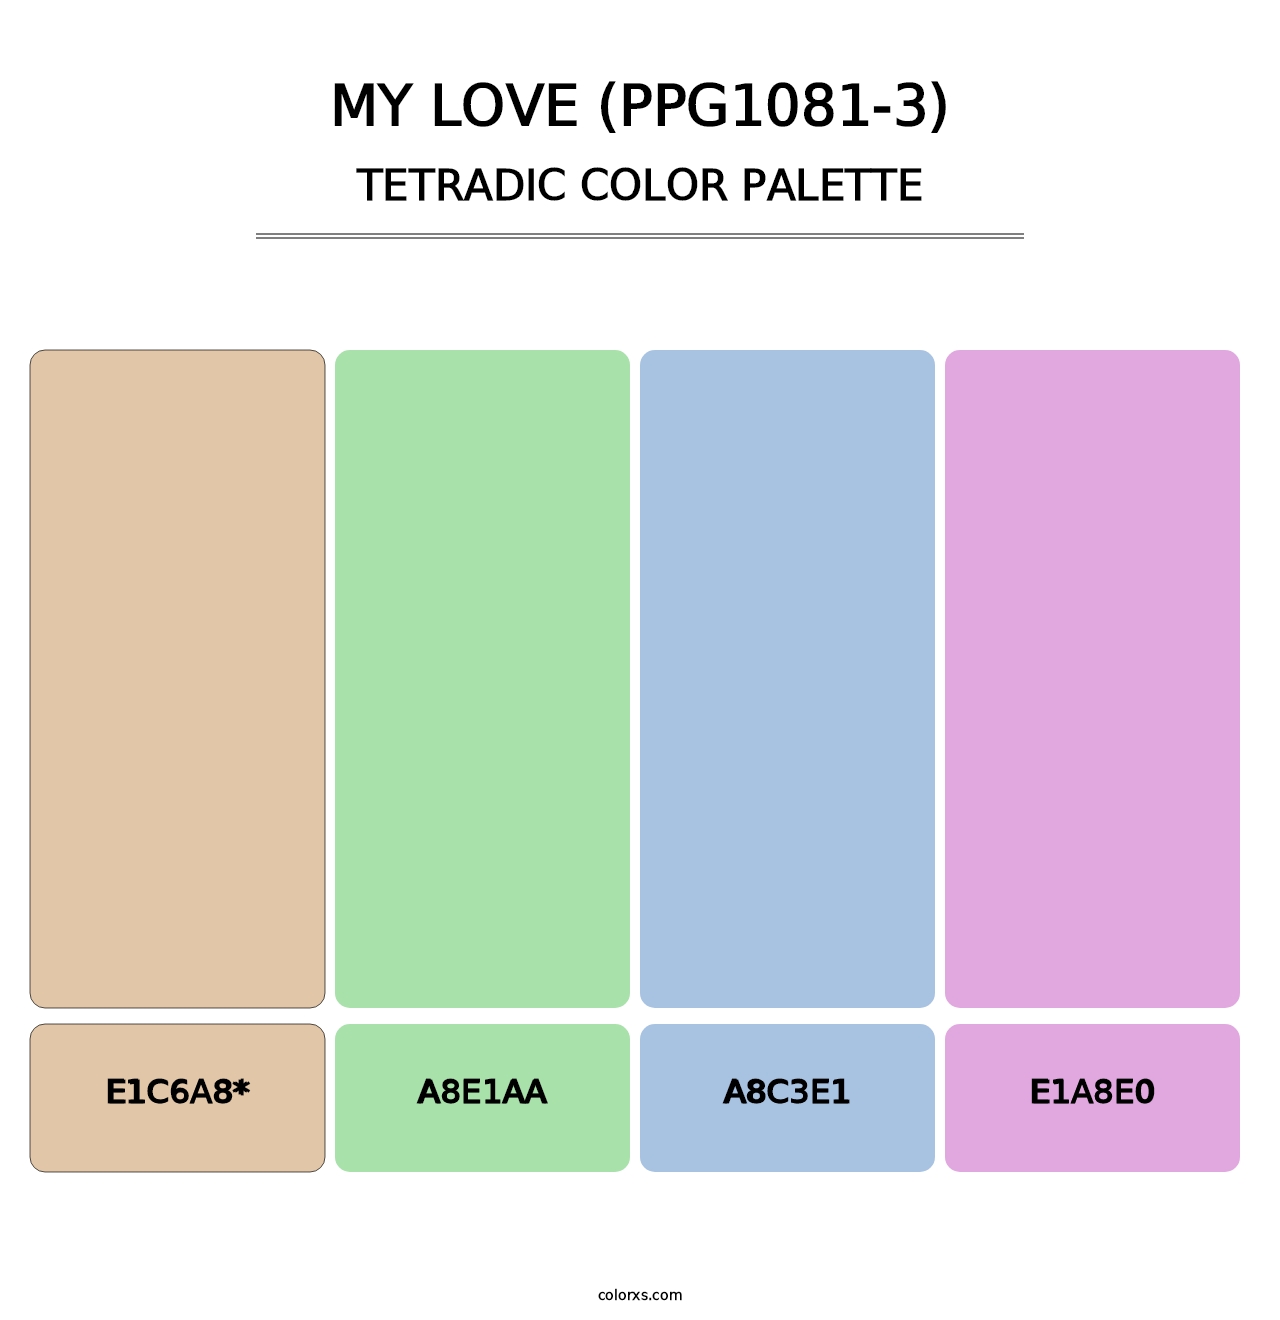 My Love (PPG1081-3) - Tetradic Color Palette